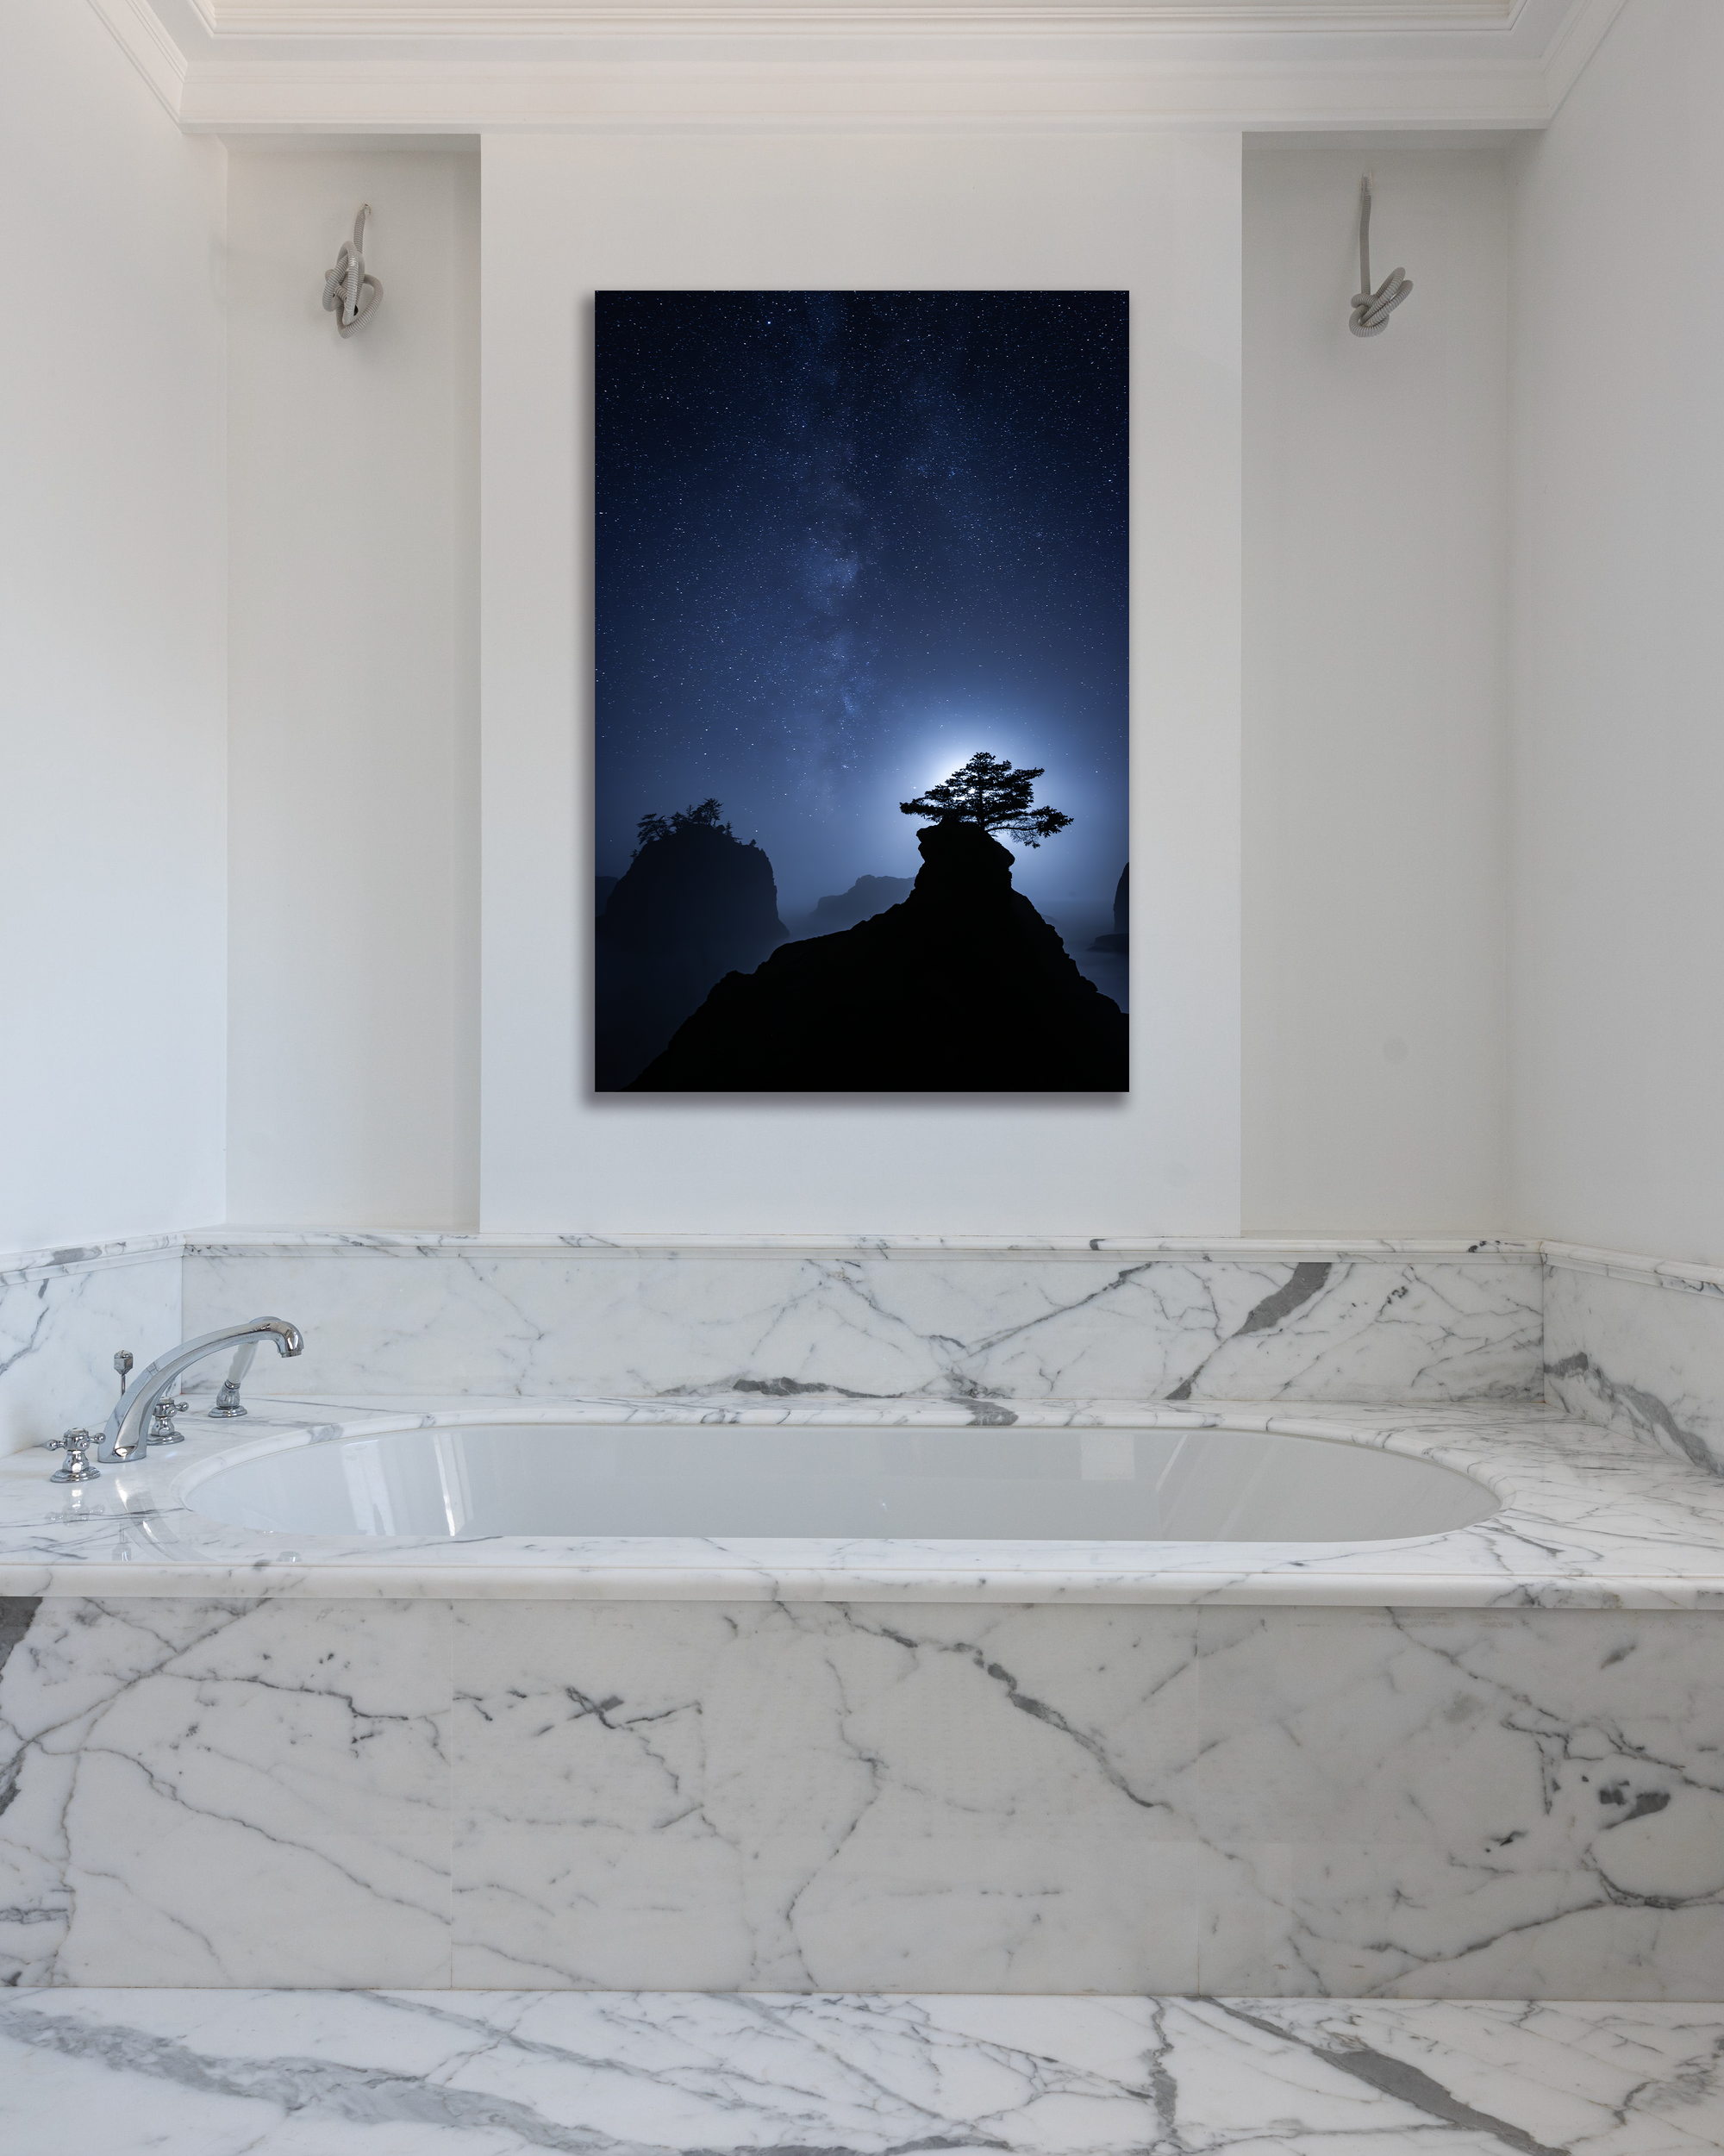 A photograph of the Milky Way with mountain peak and tree silhouettes hangs on a bathroom wall.